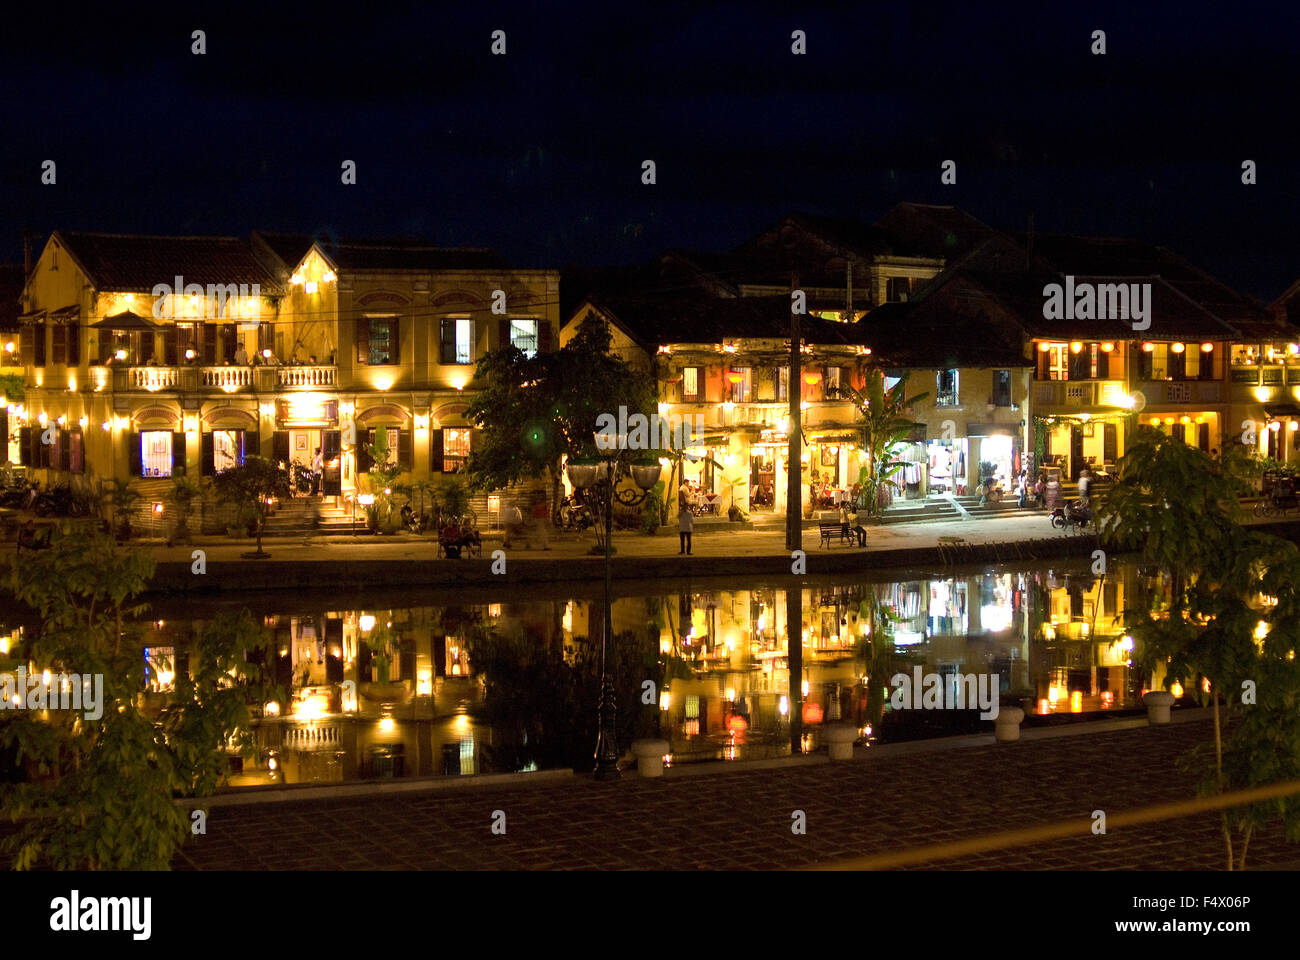 Hoi Riverside at Night. Old Town Hoi An at Night. Hoi An. Hoi An old quarter. View across Thu Bon river onto the beautiful Bach Stock Photo